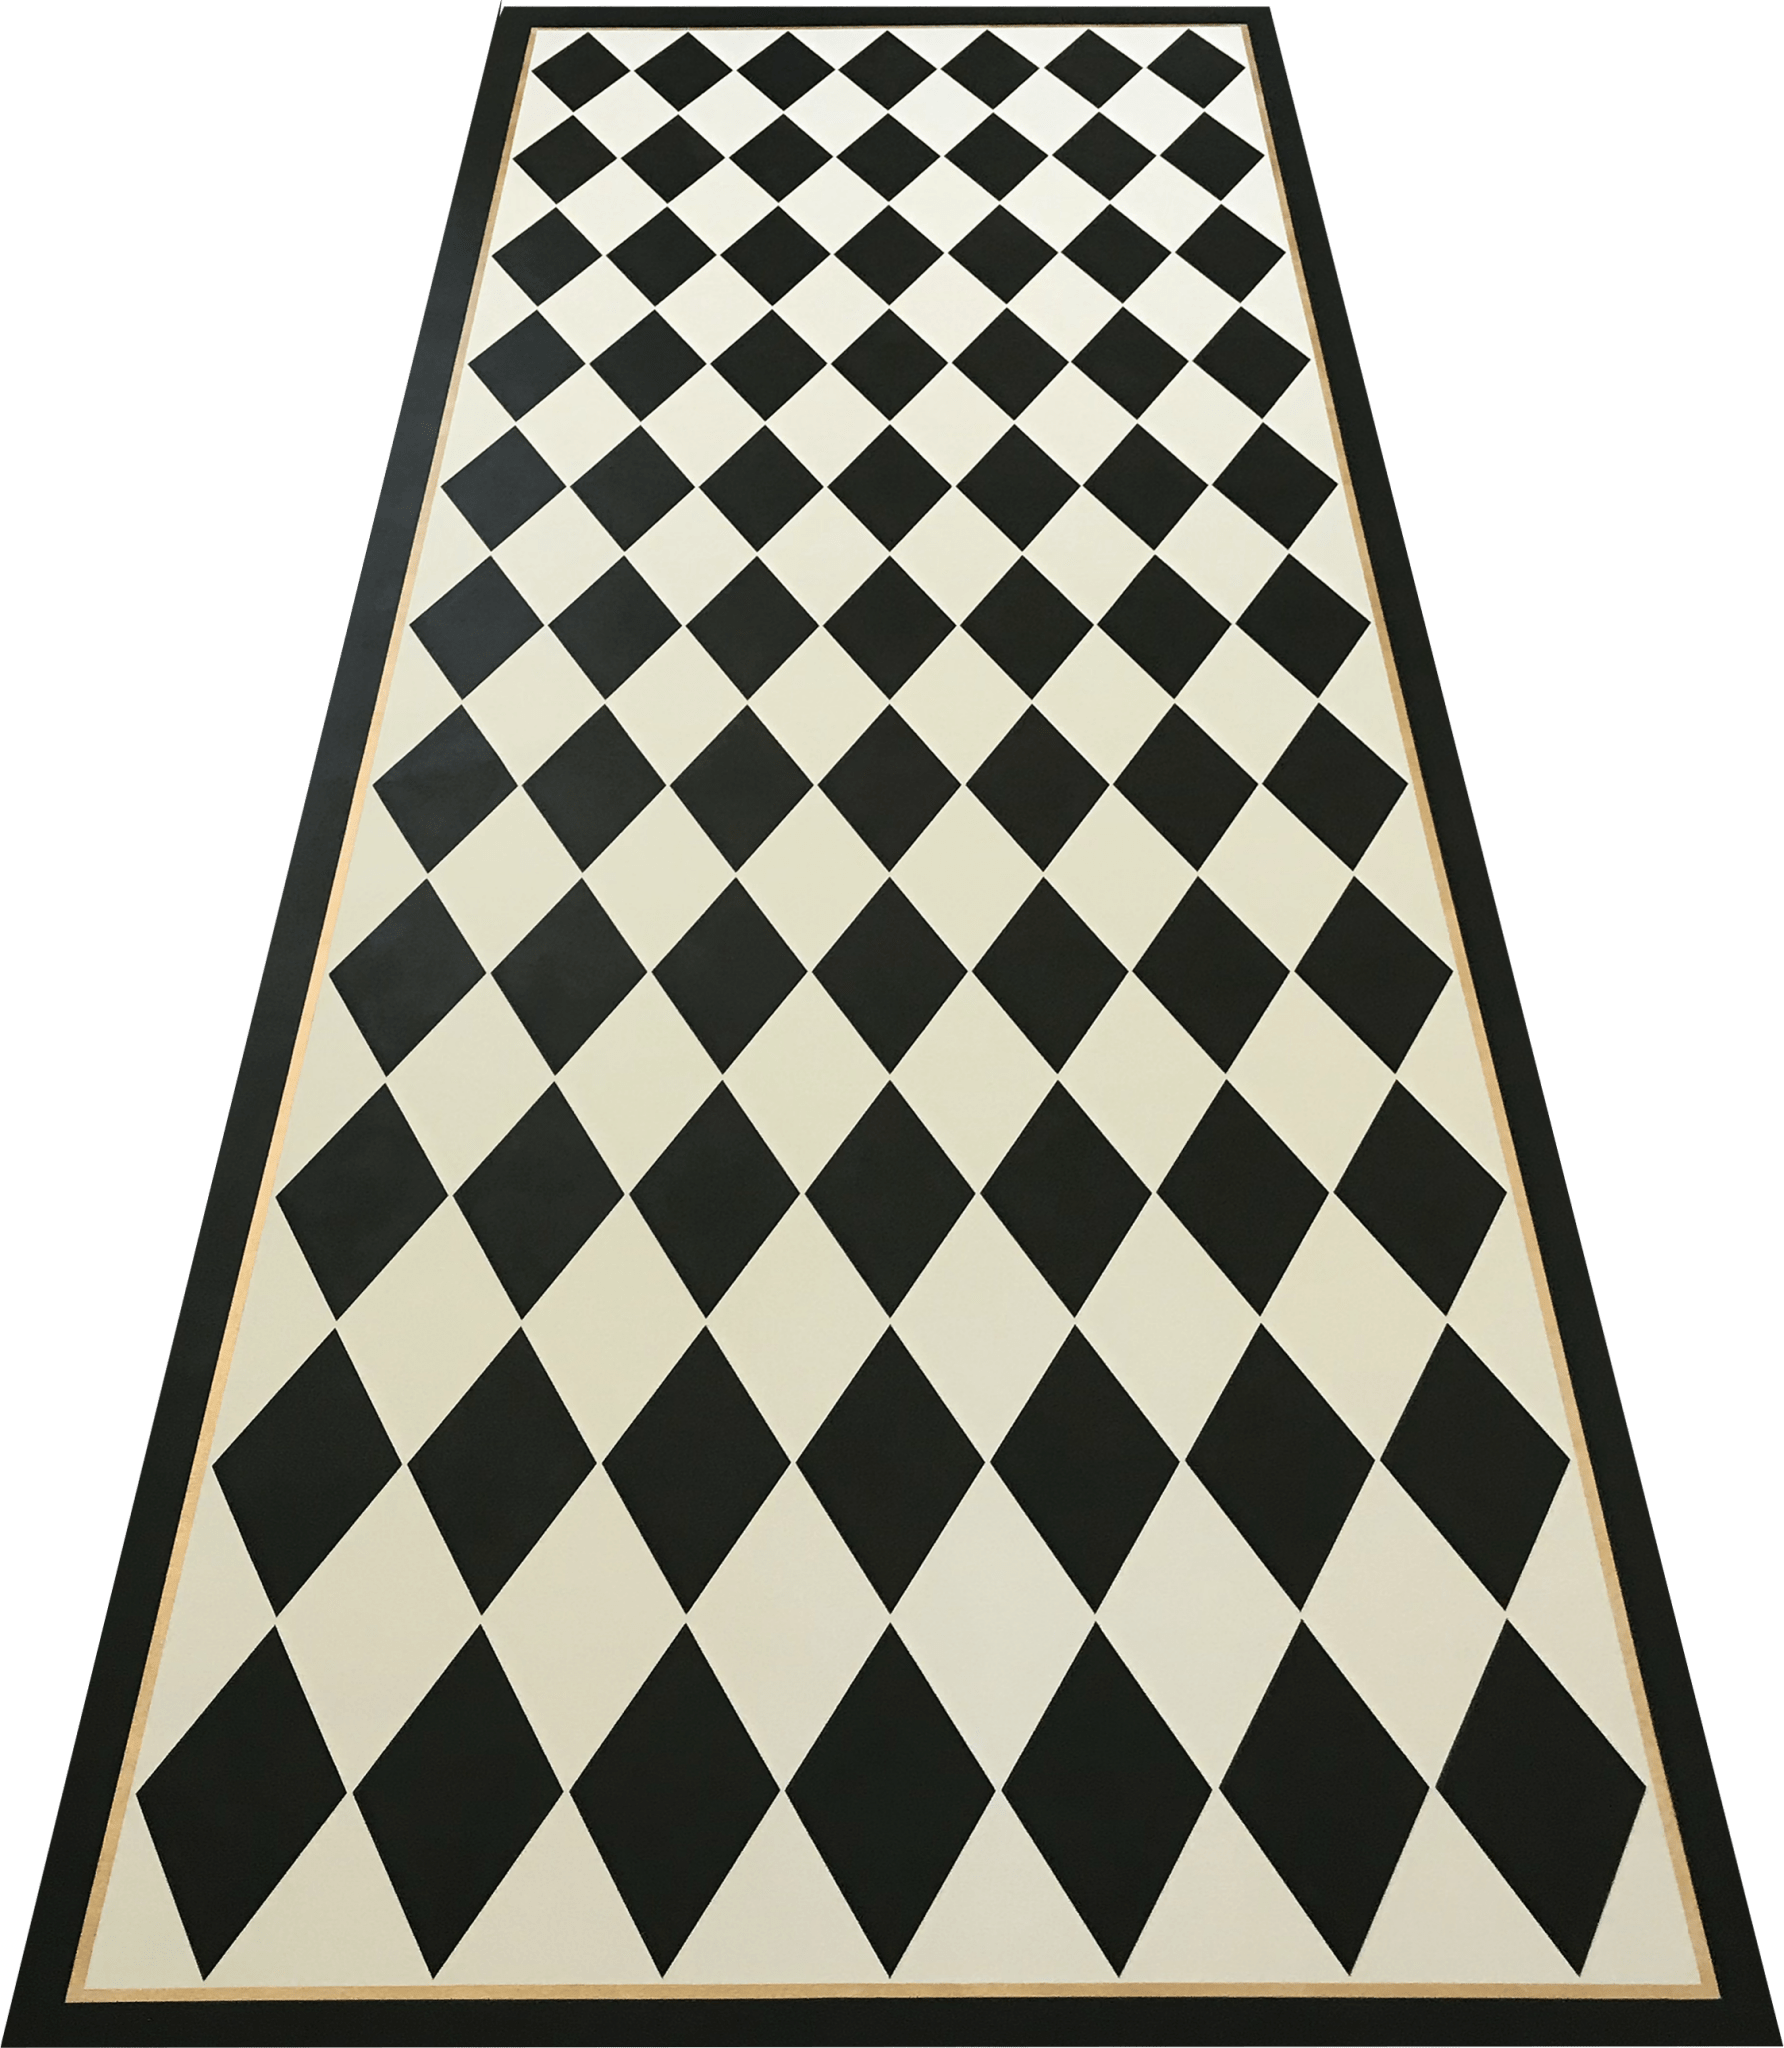 Full image of this 5'3" x 15' 9" harlequin patterned floorcloth in a soft yellow-white and charcoal colorway.